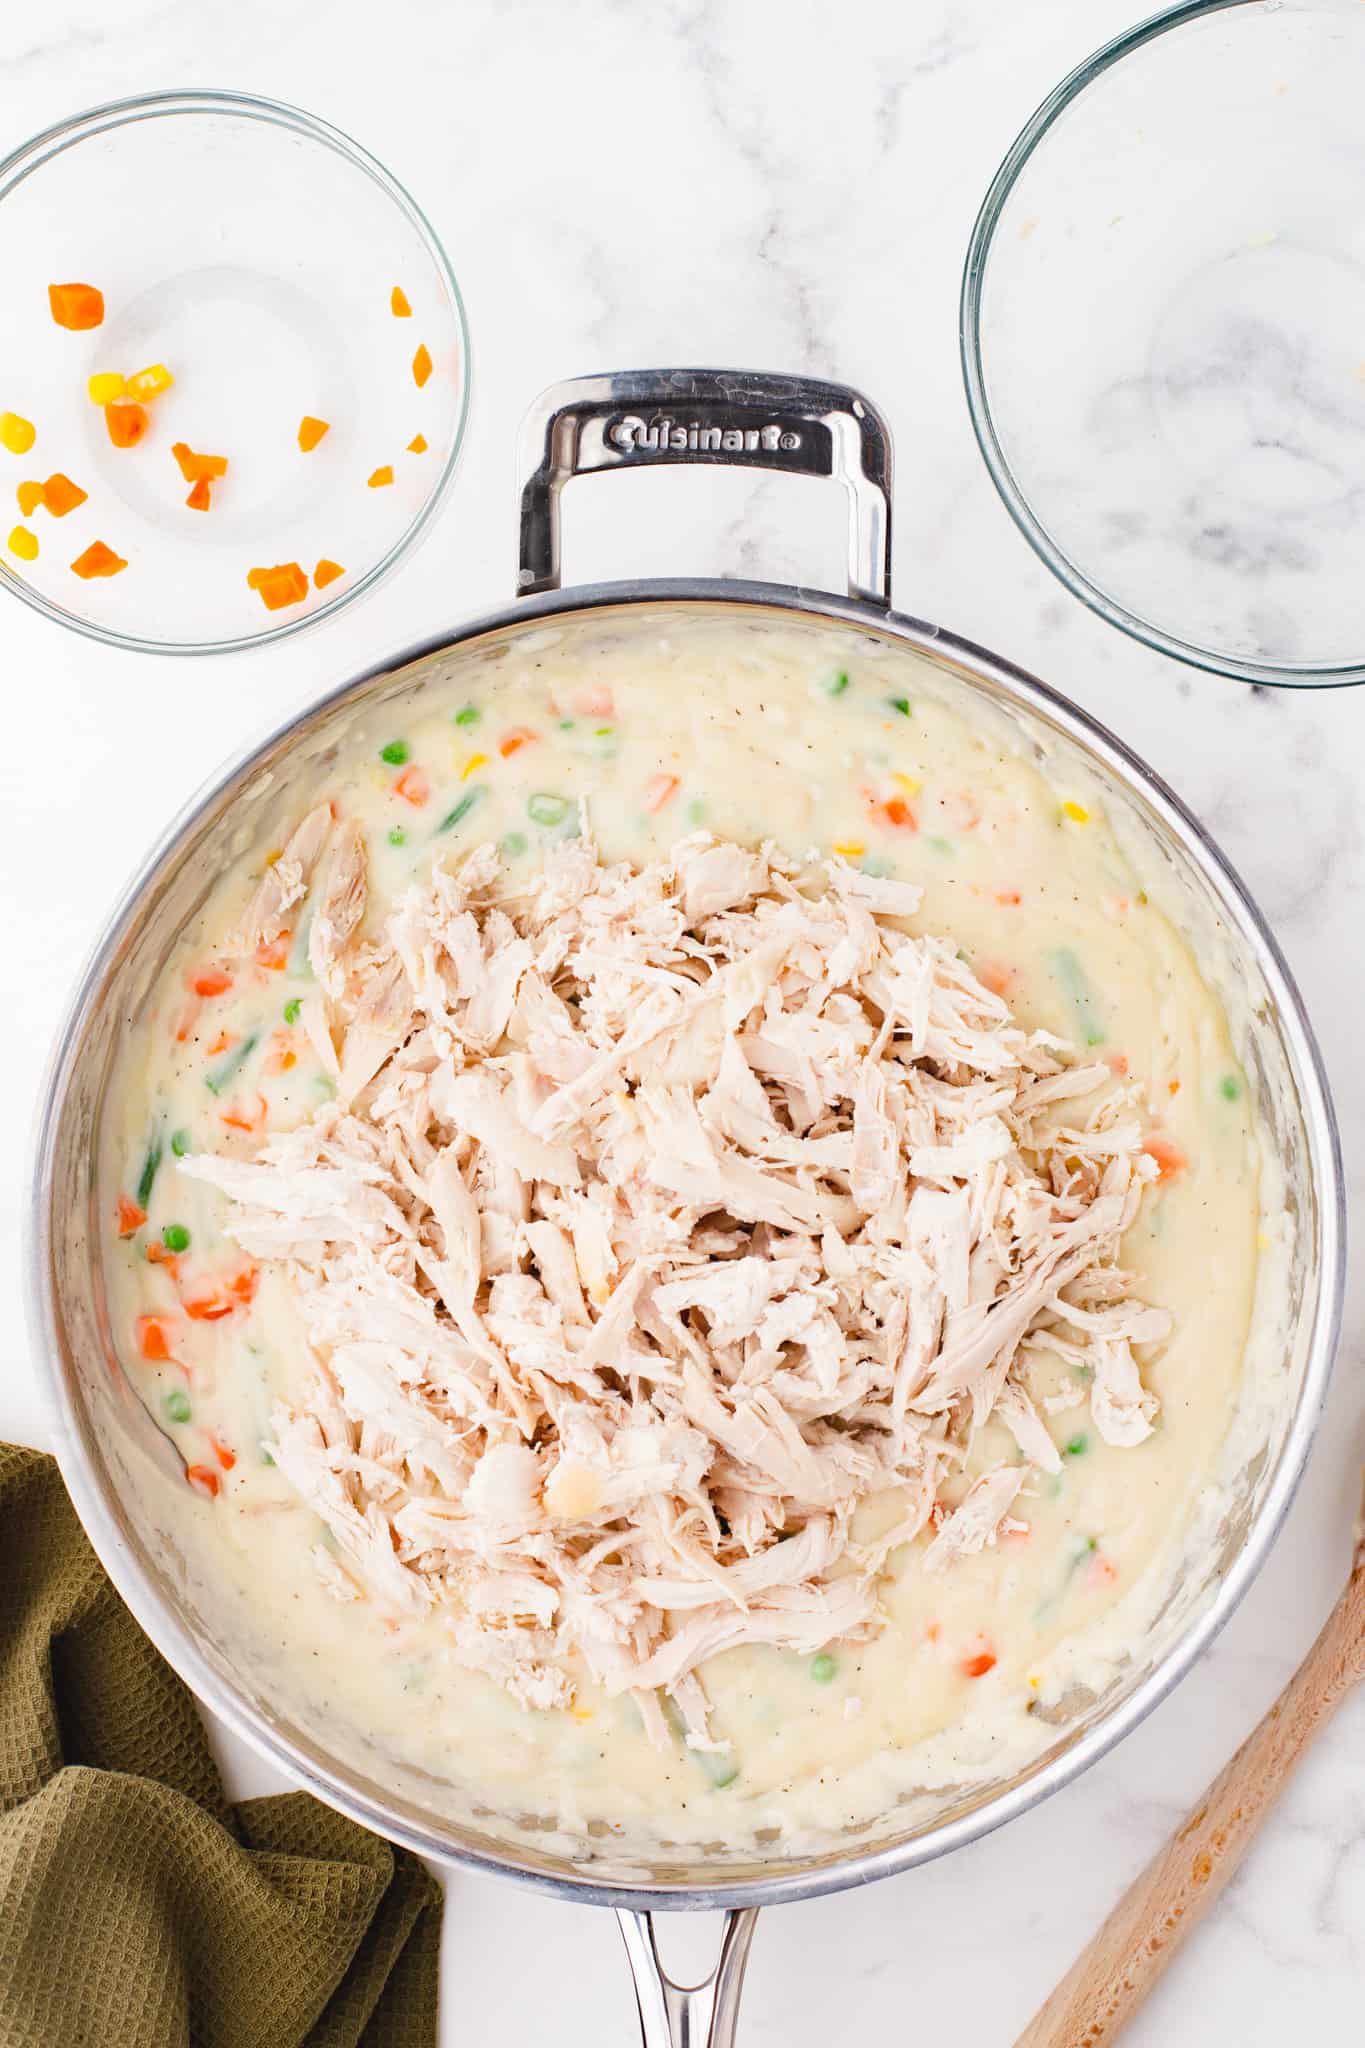 shredded chicken added to creamy vegetable mixture in a skillet